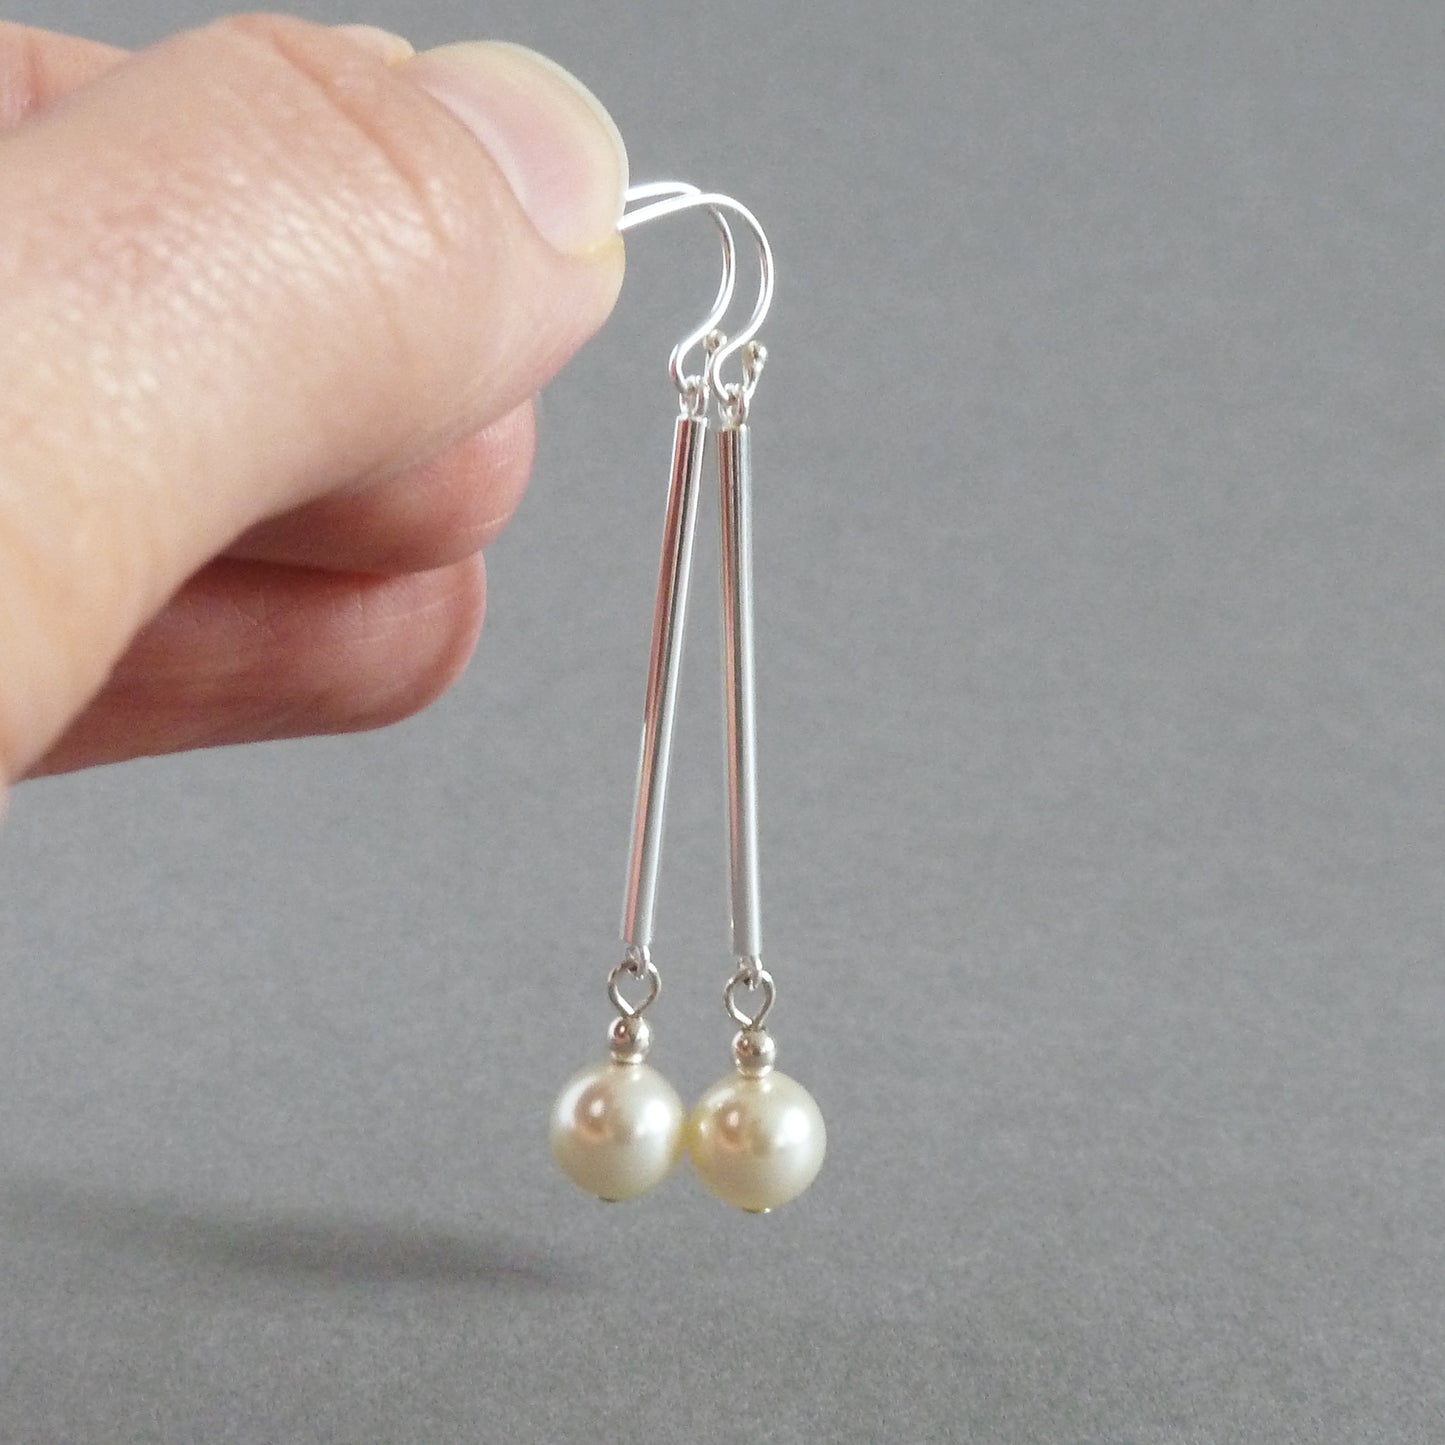 Sterling silver bar and cream pearl earrings